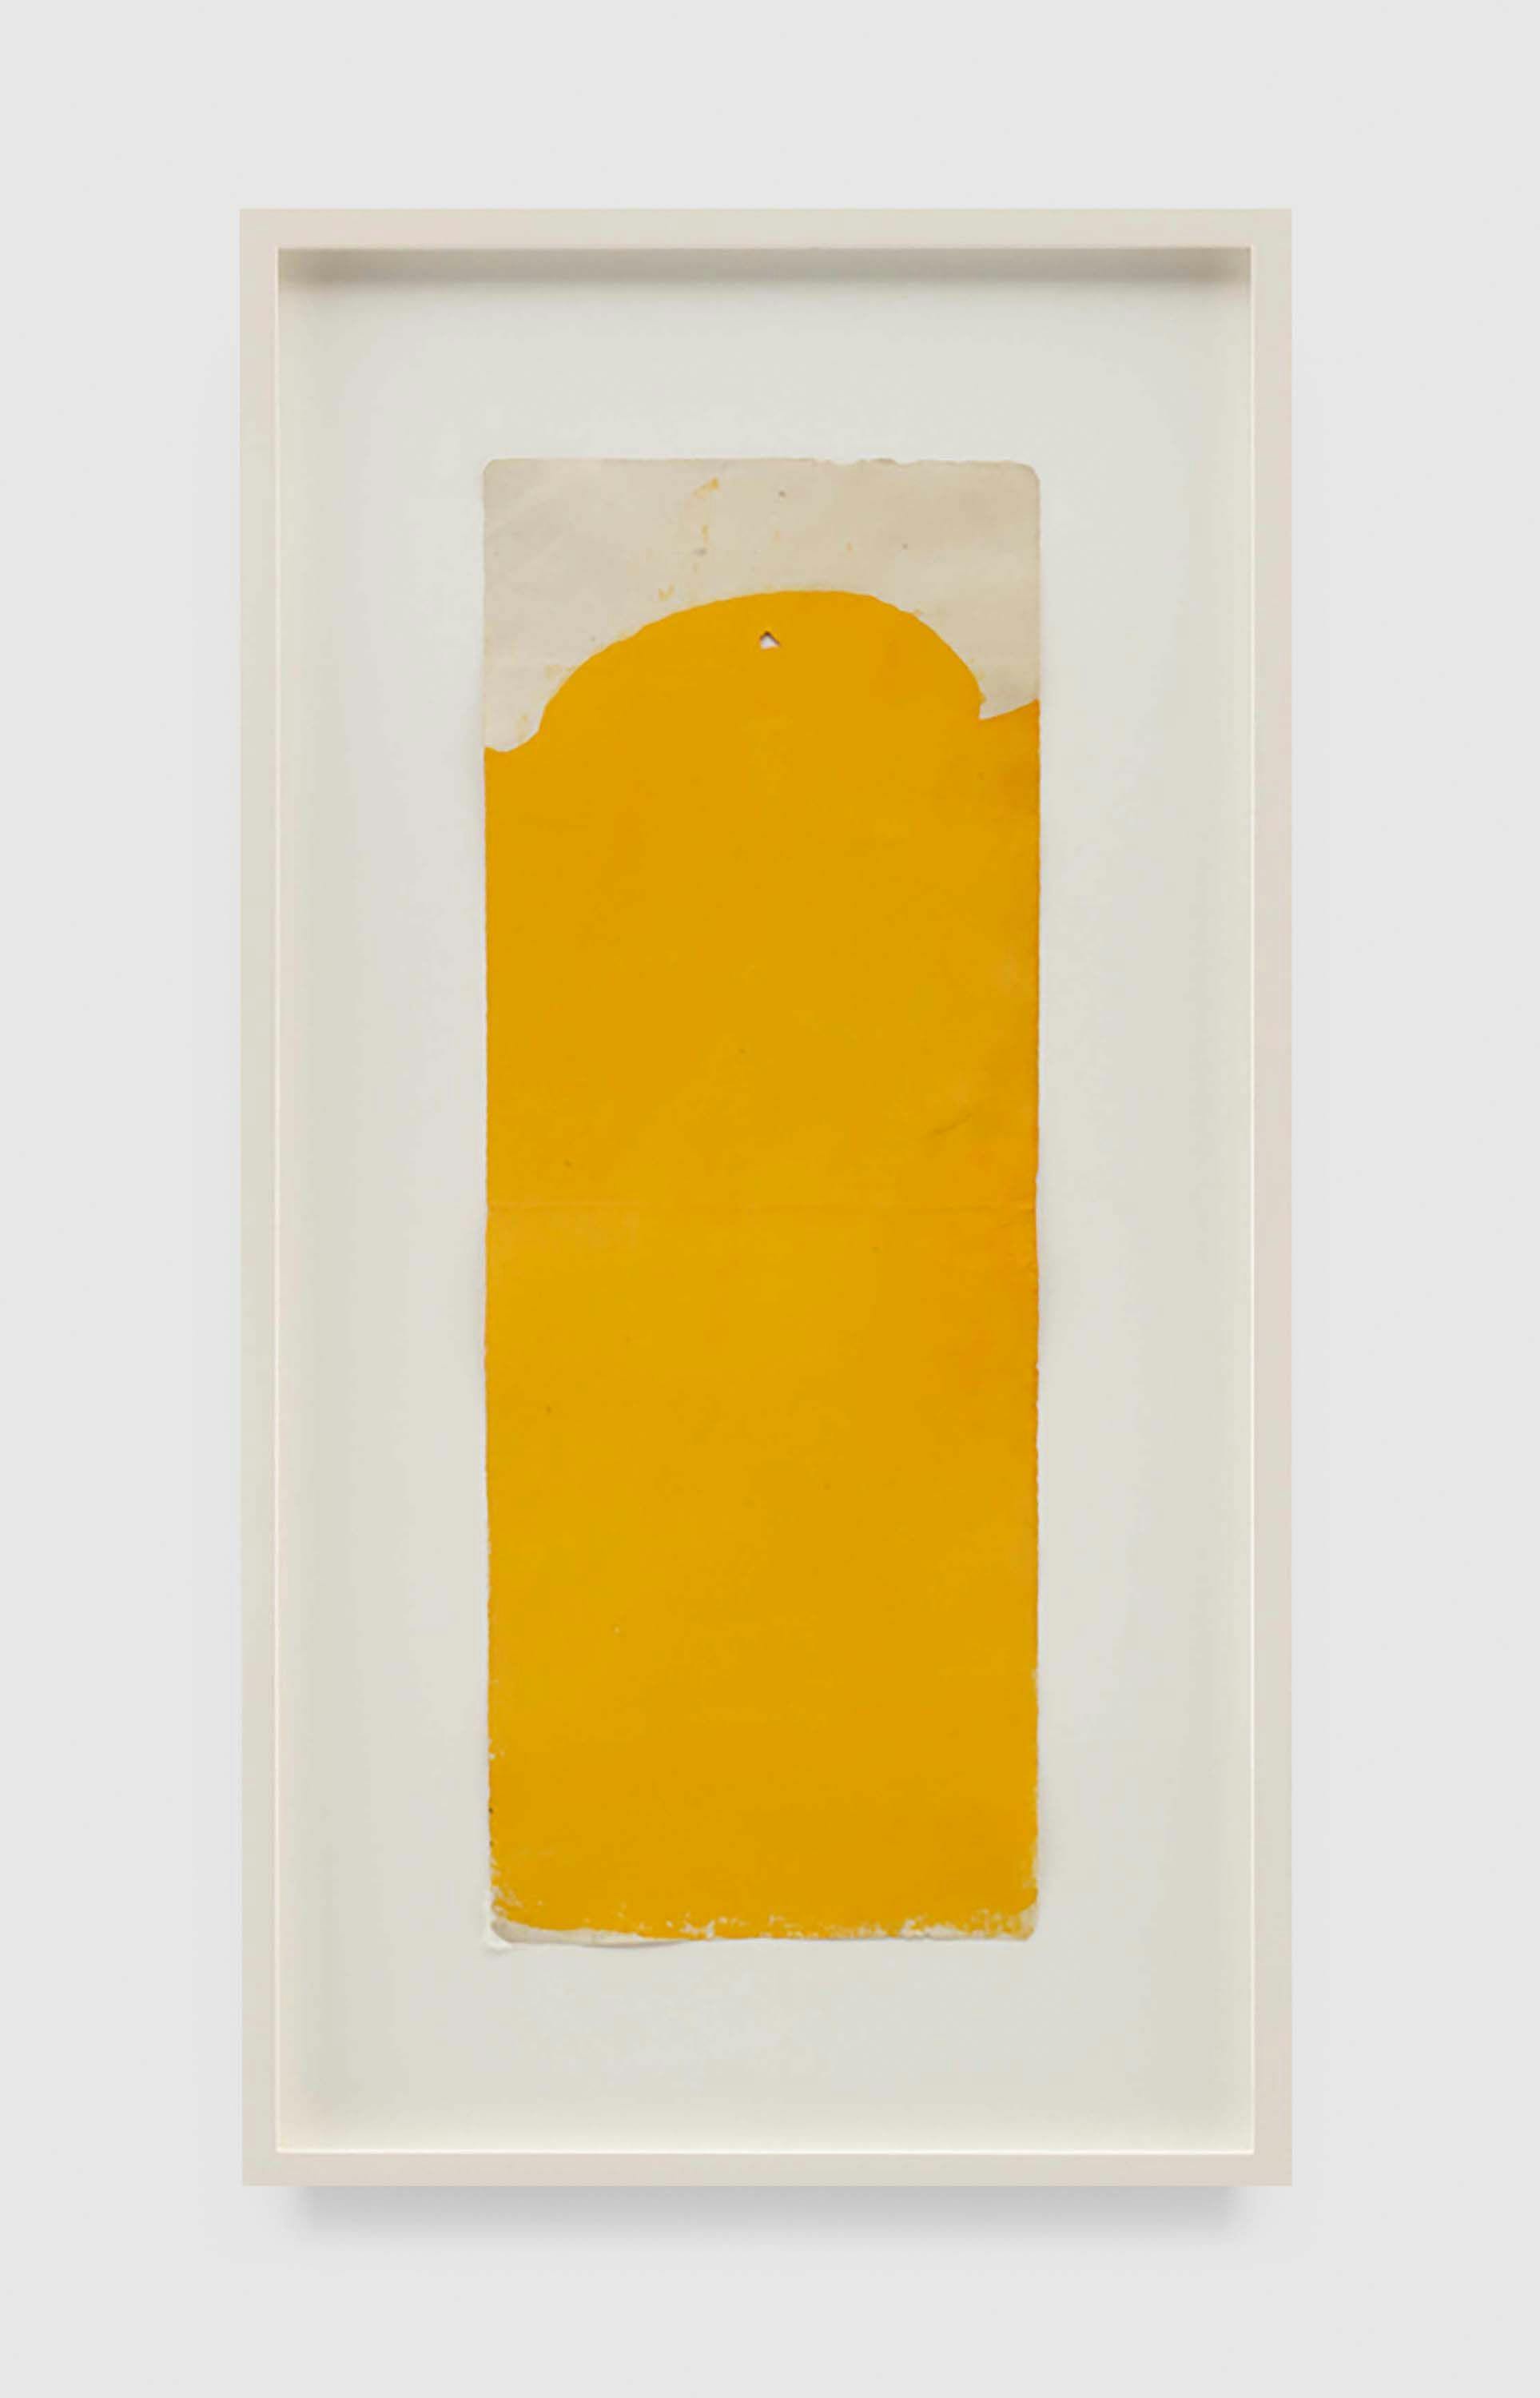 A painting by Suzan Frecon, titled vertical orange composition on small format 2, dated 2010.